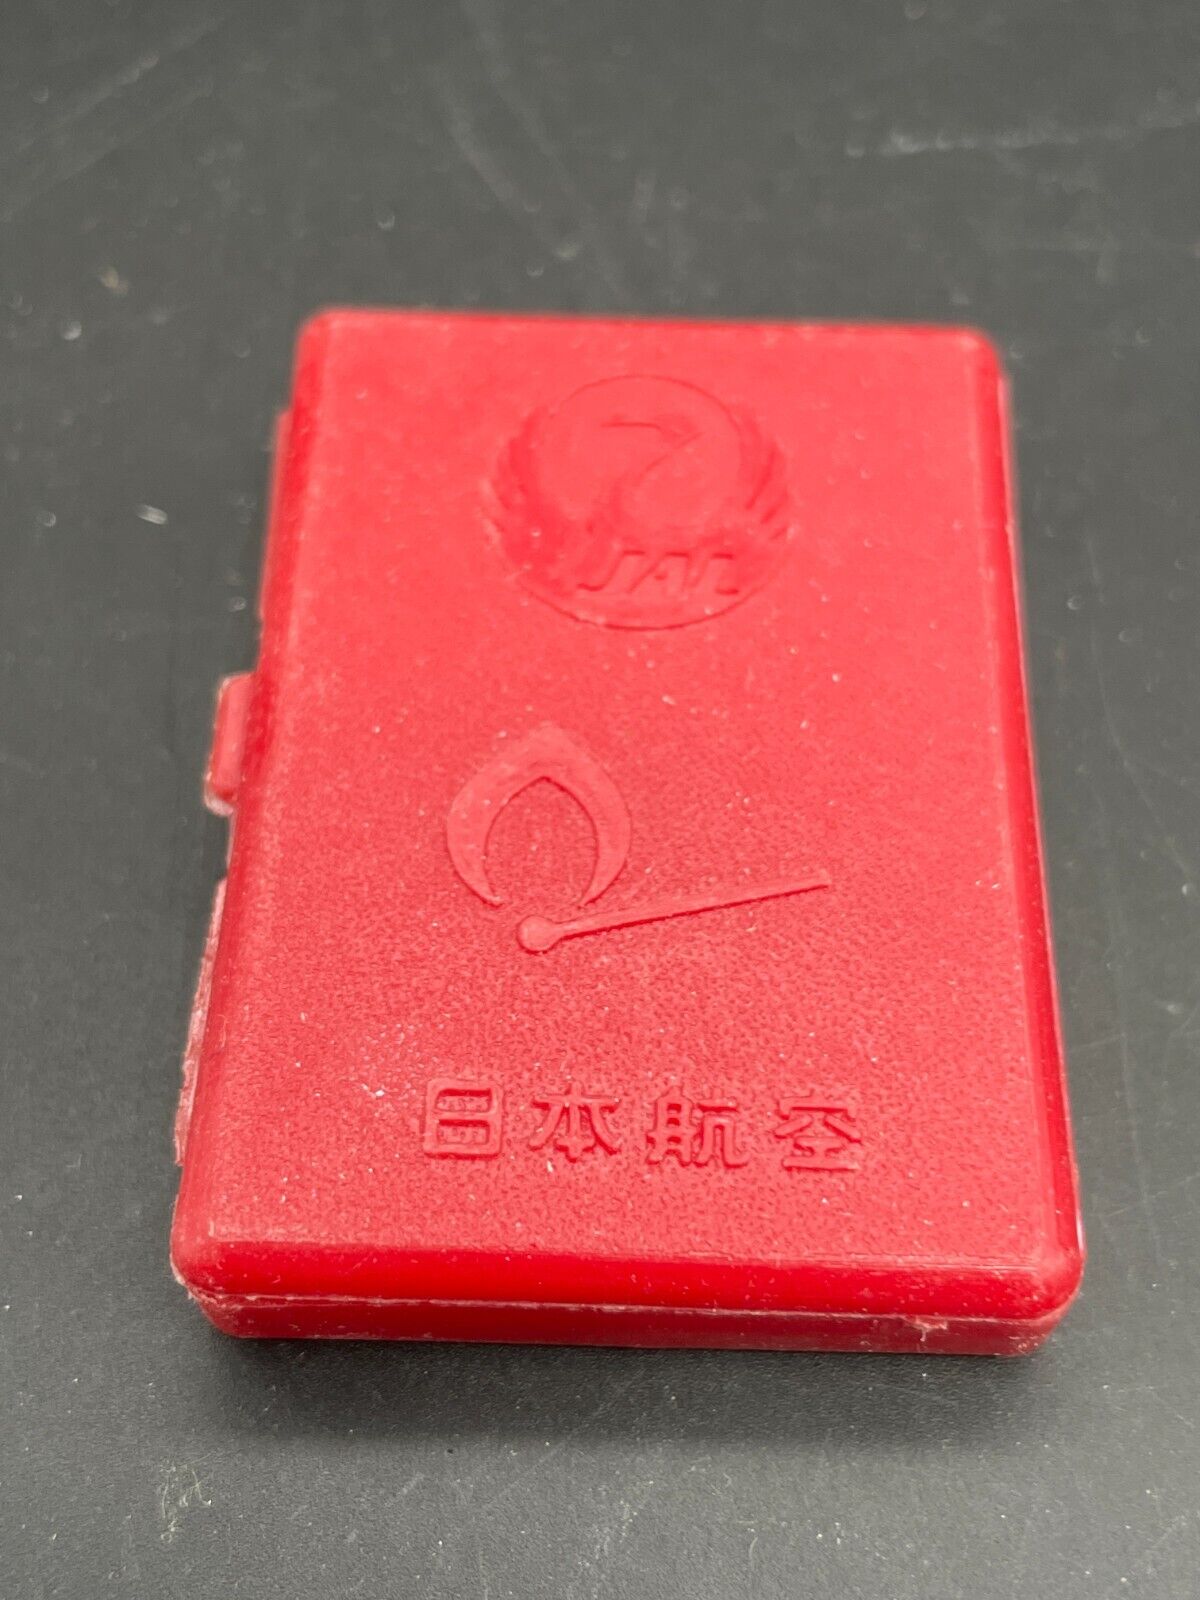 Vintage Japanese Airline JAL Rear Strike Match Safe Matchstick Box Matches Red